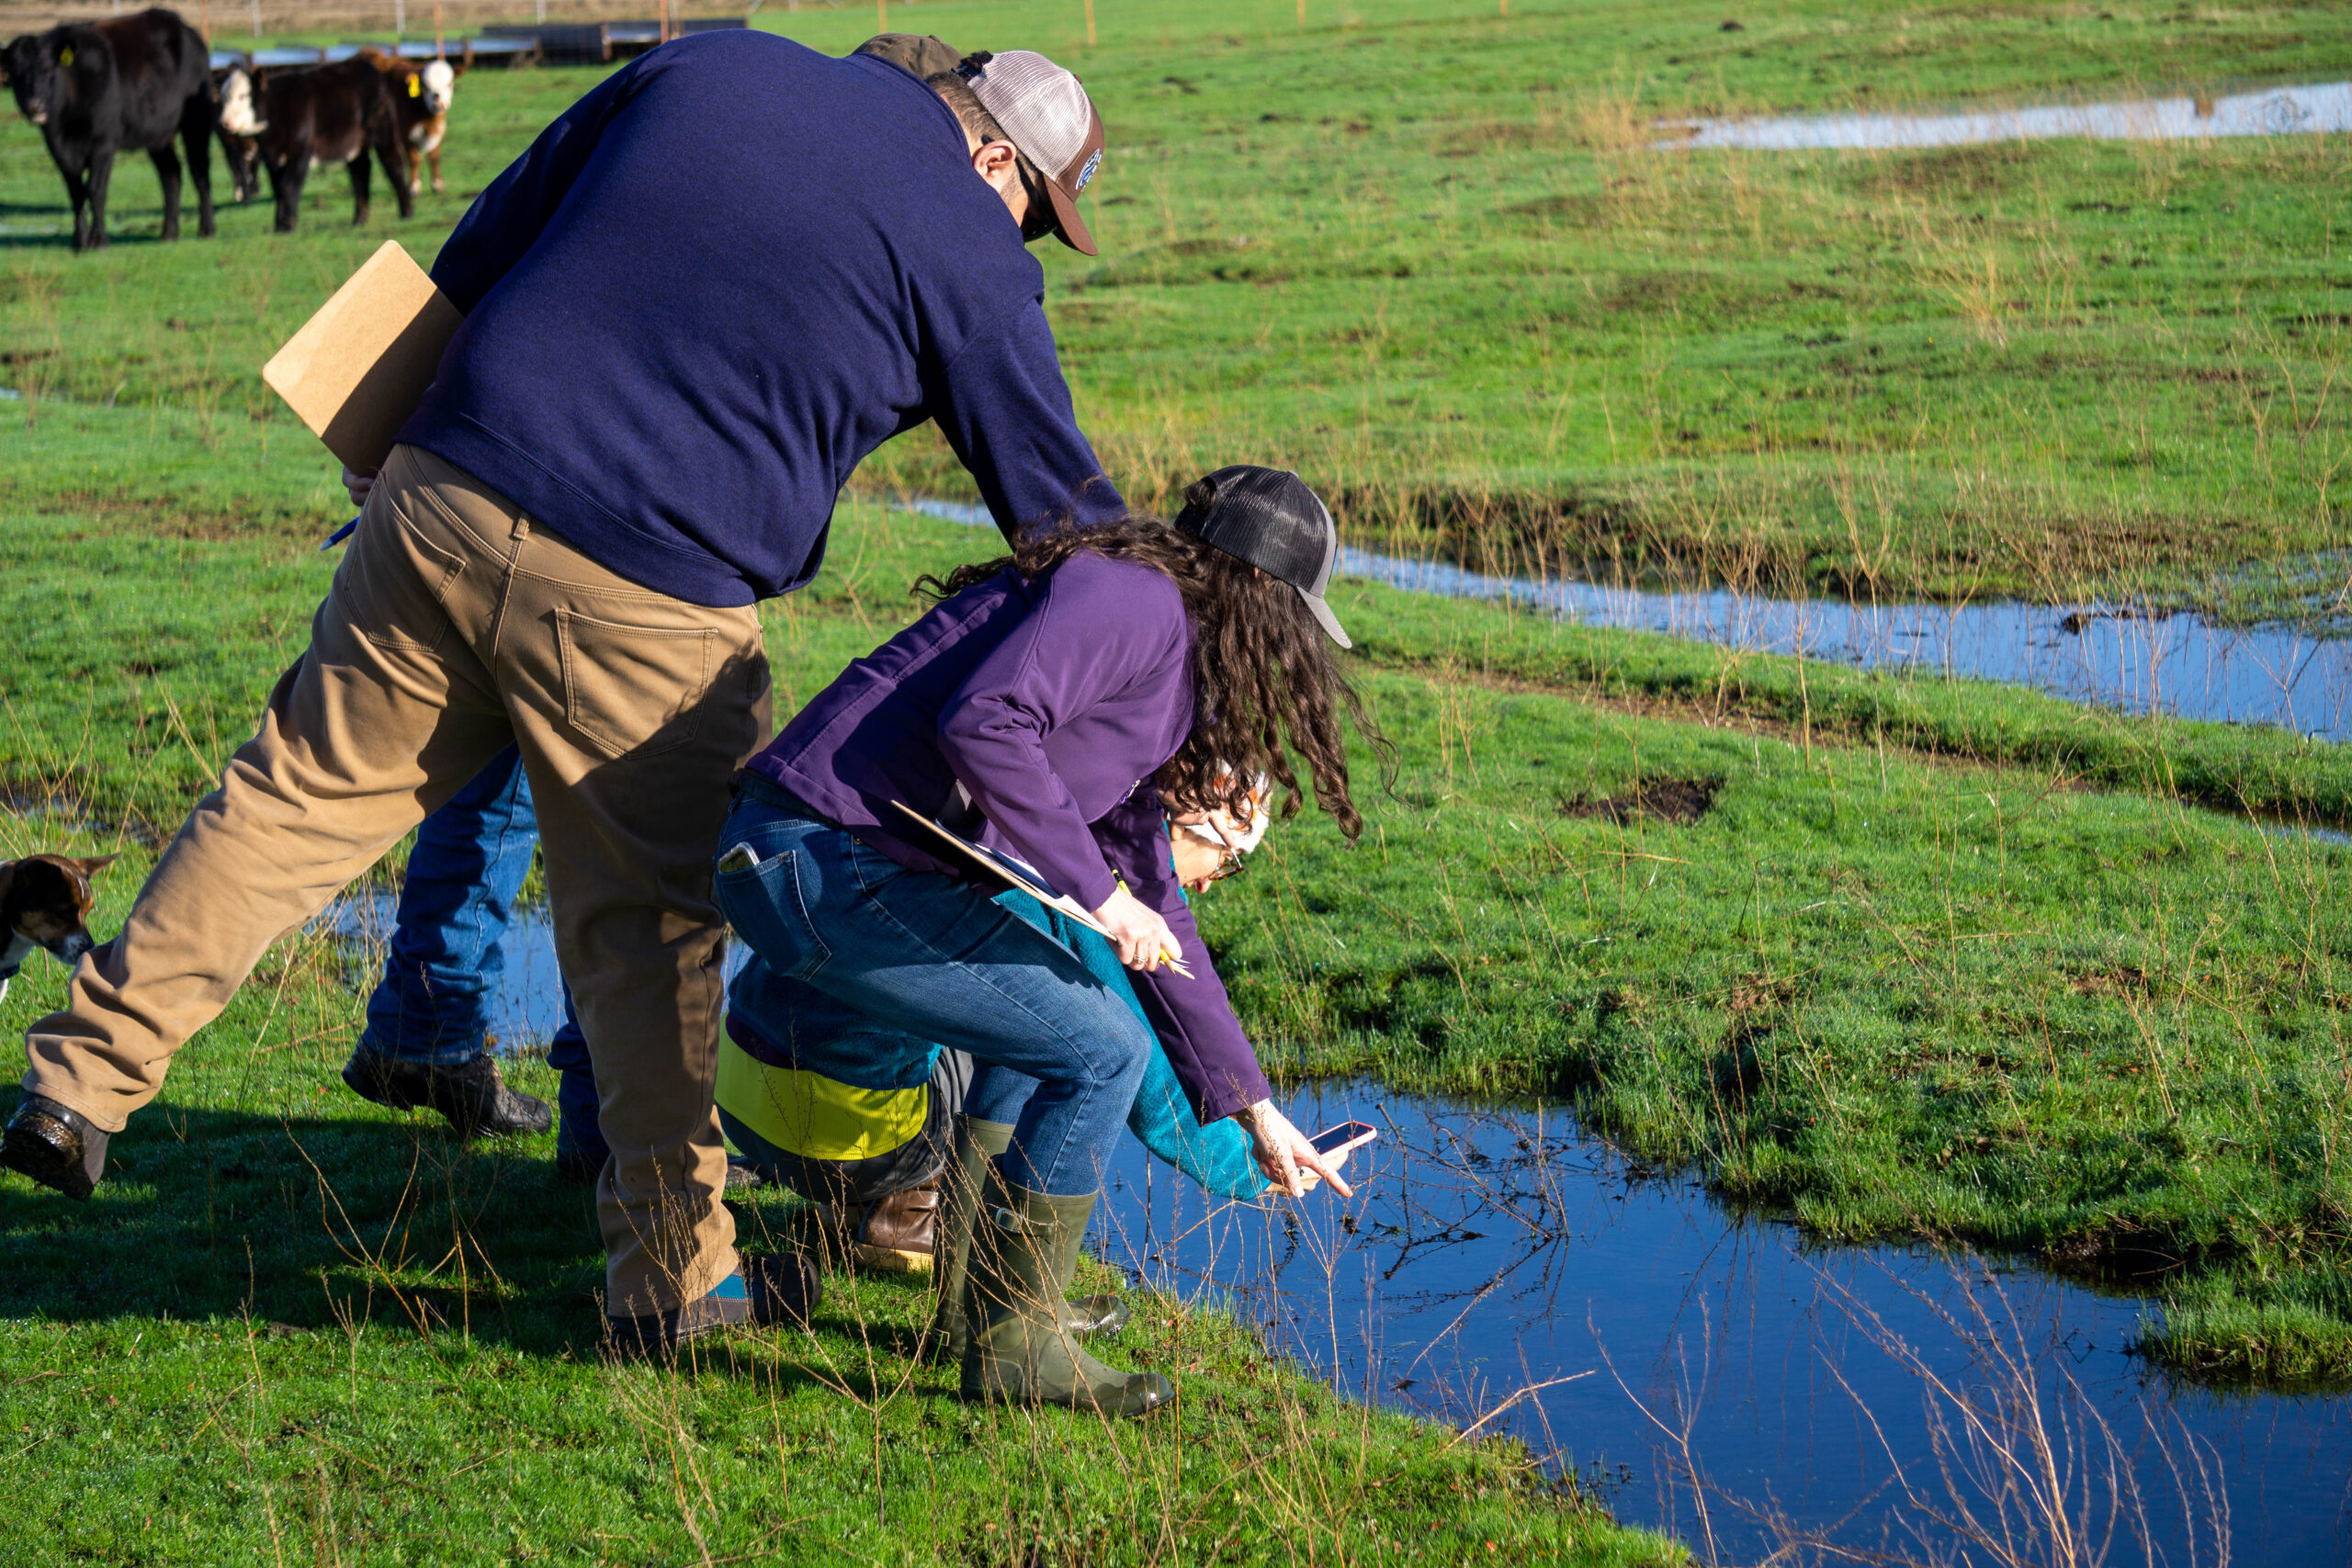 People in a field with green grass next to a vernal pool looking at what is inside it.